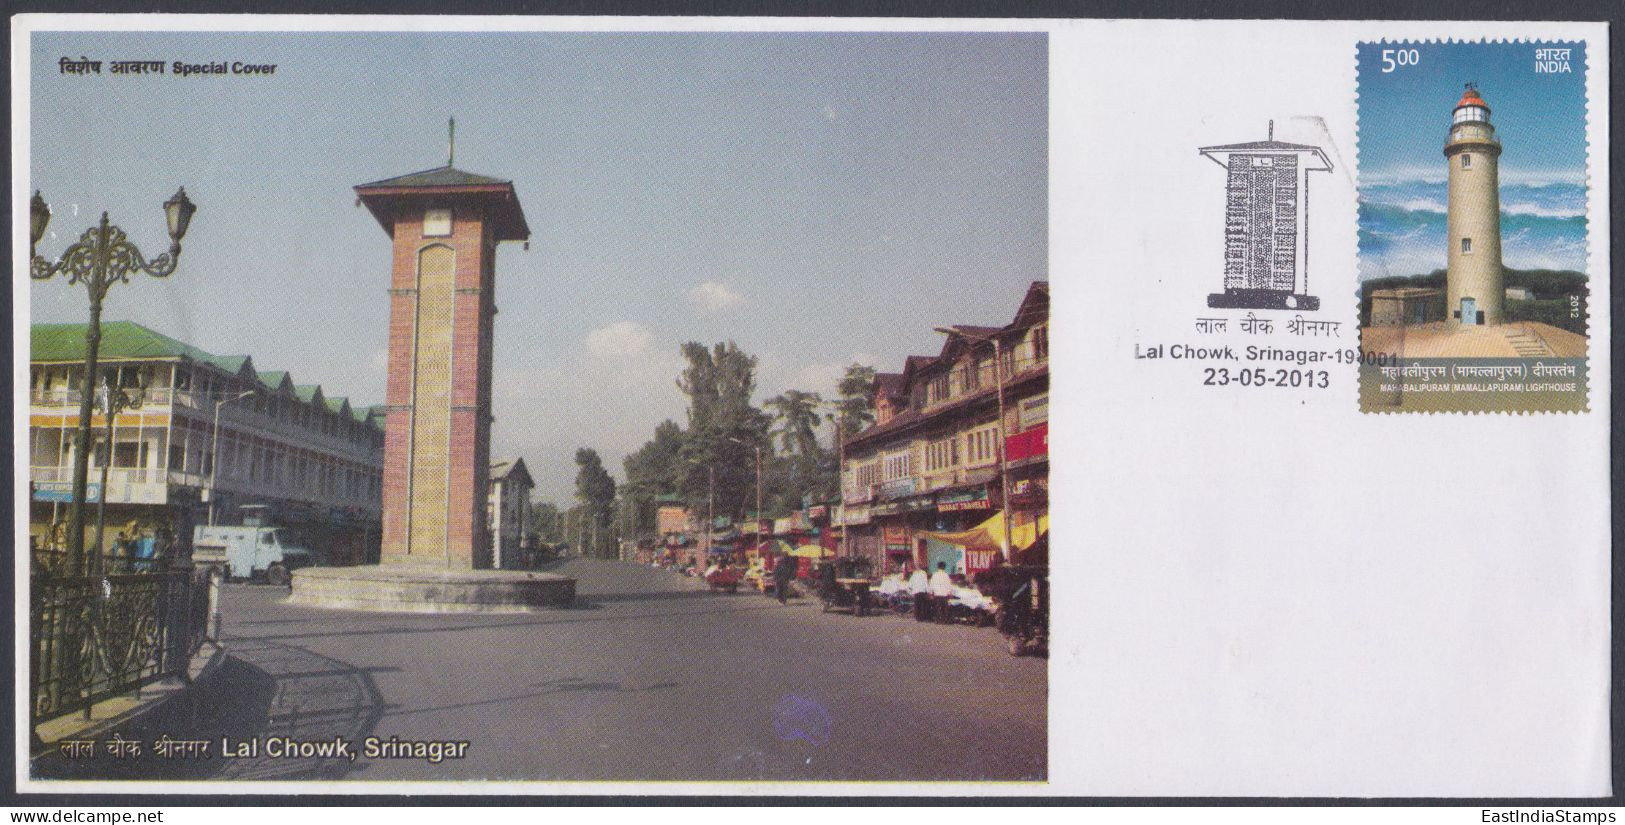 Inde India 2013 Special Cover Lal Chowk, Srinagar, Kashmir, Clock Tower, City Center, Pictorial Postmark - Covers & Documents